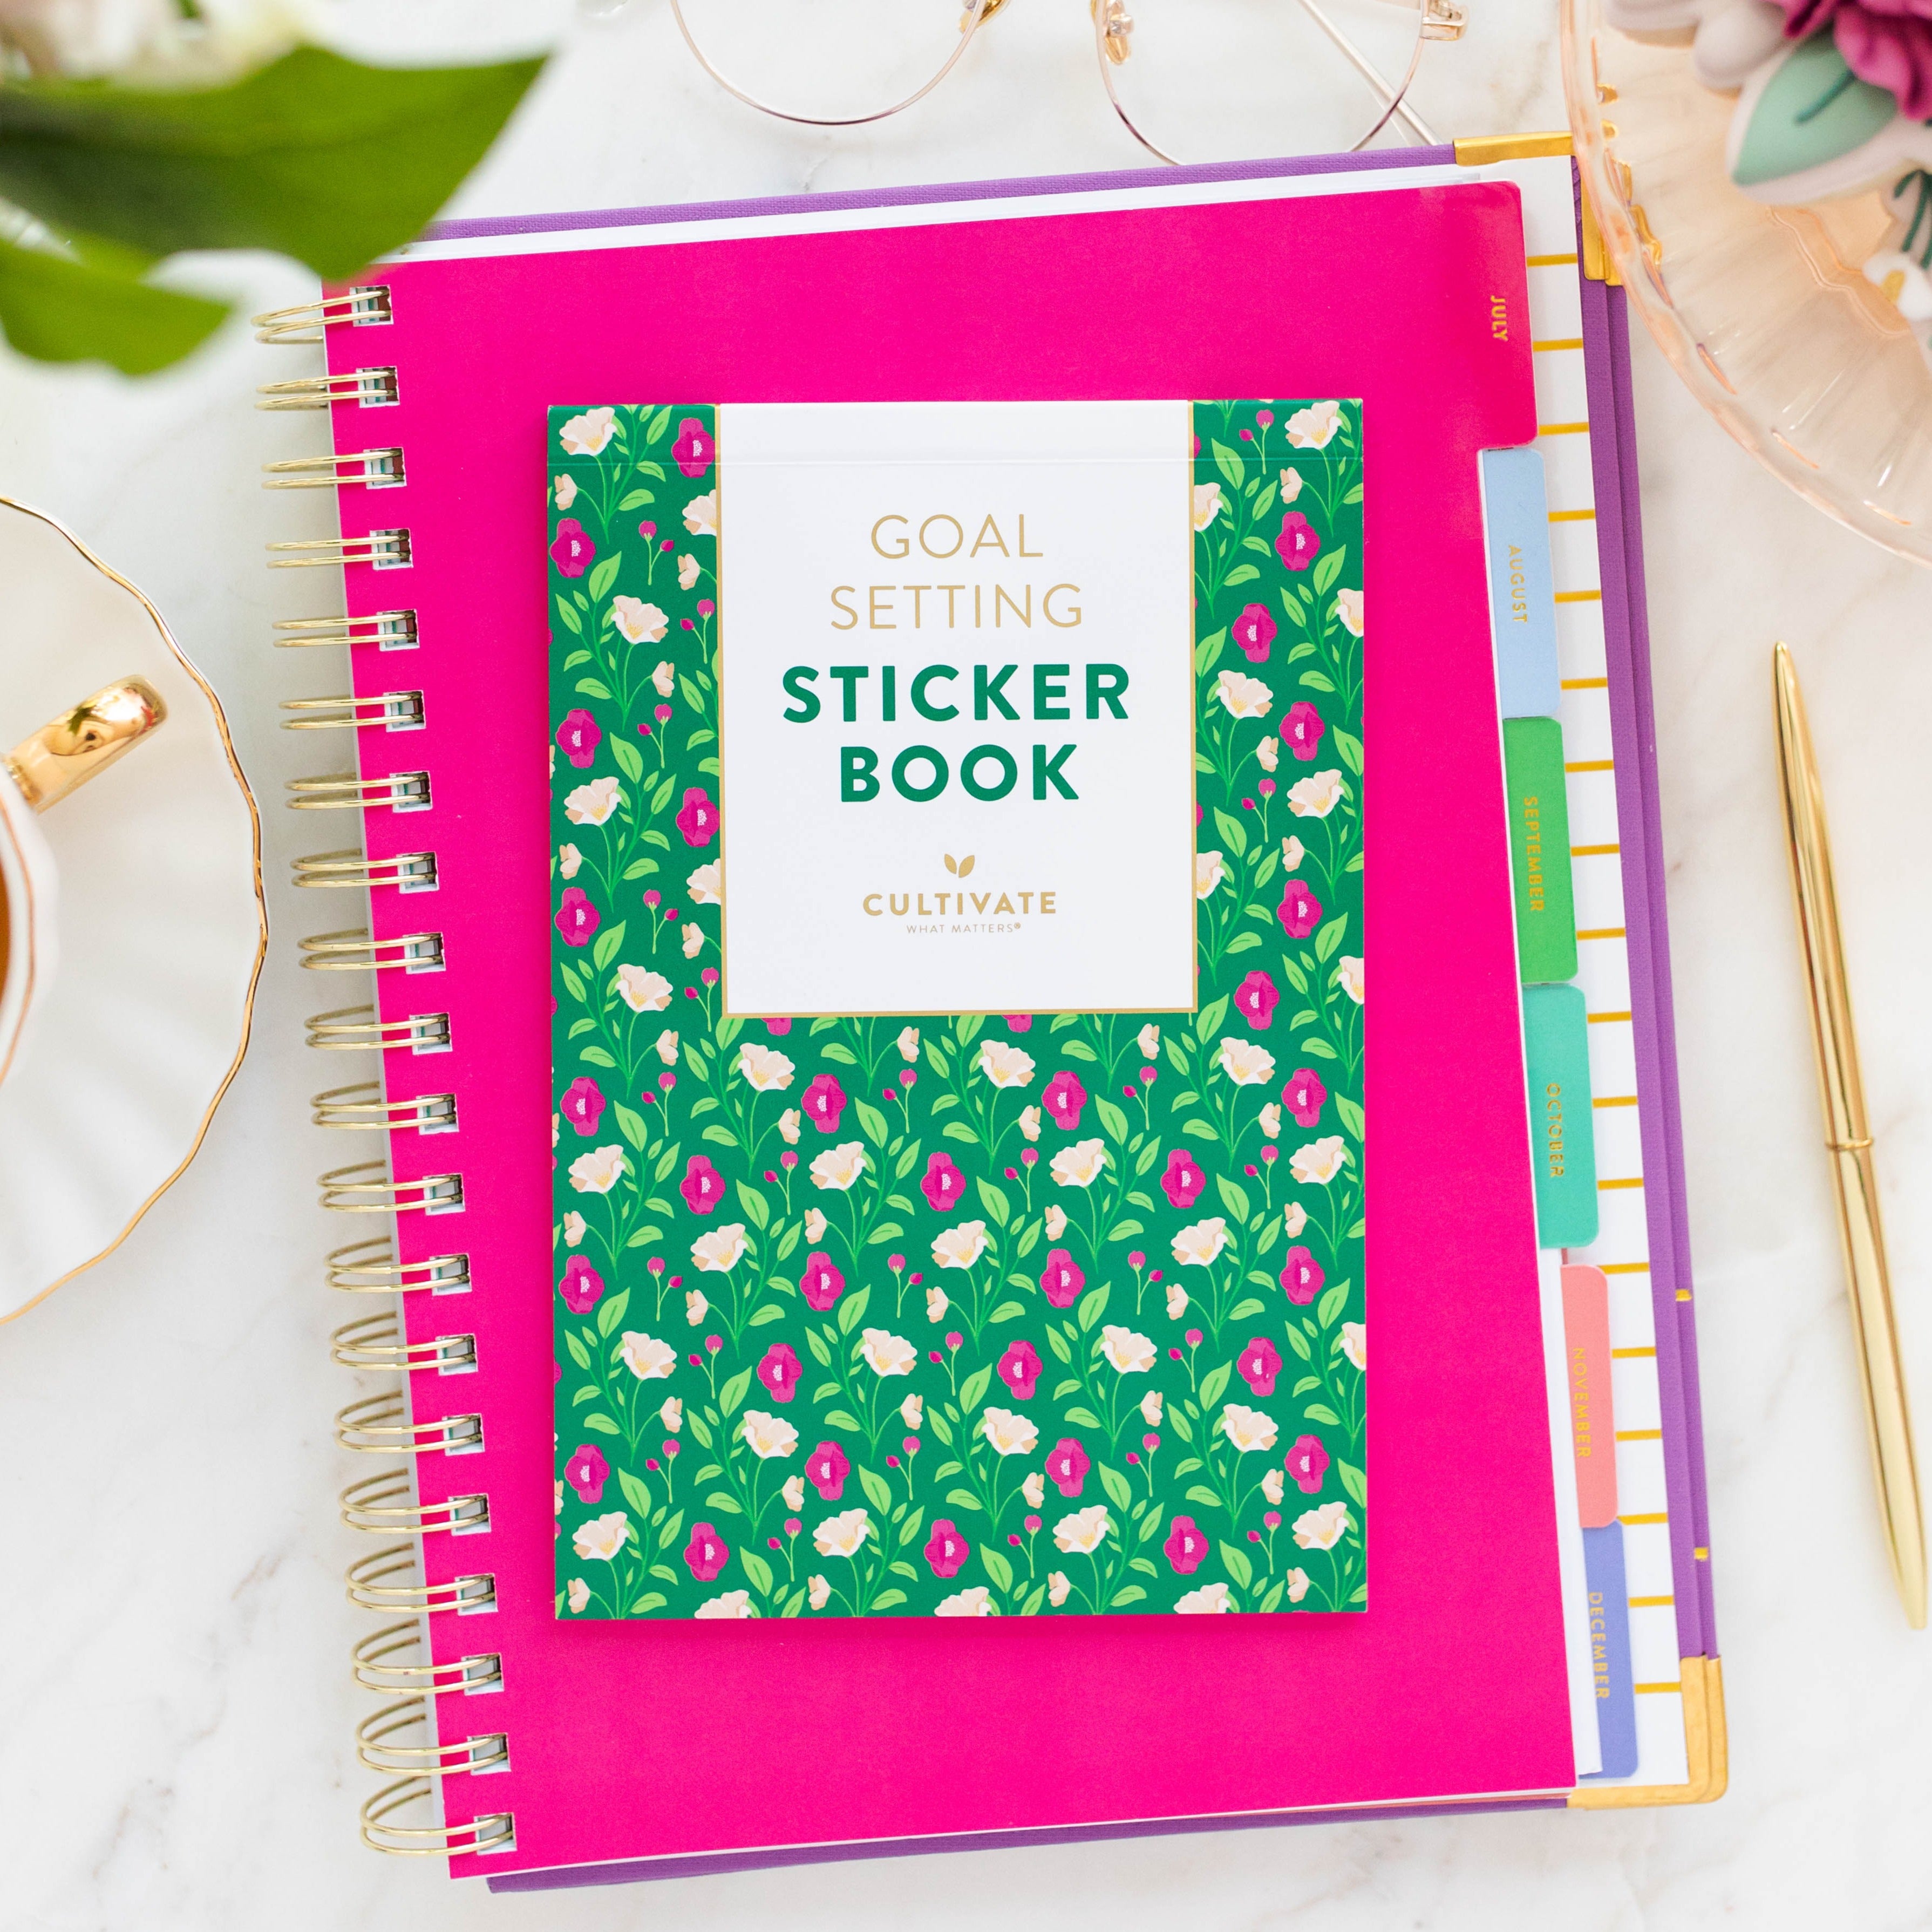 Diary stickers. Check and with list, goals and arrows, yes a